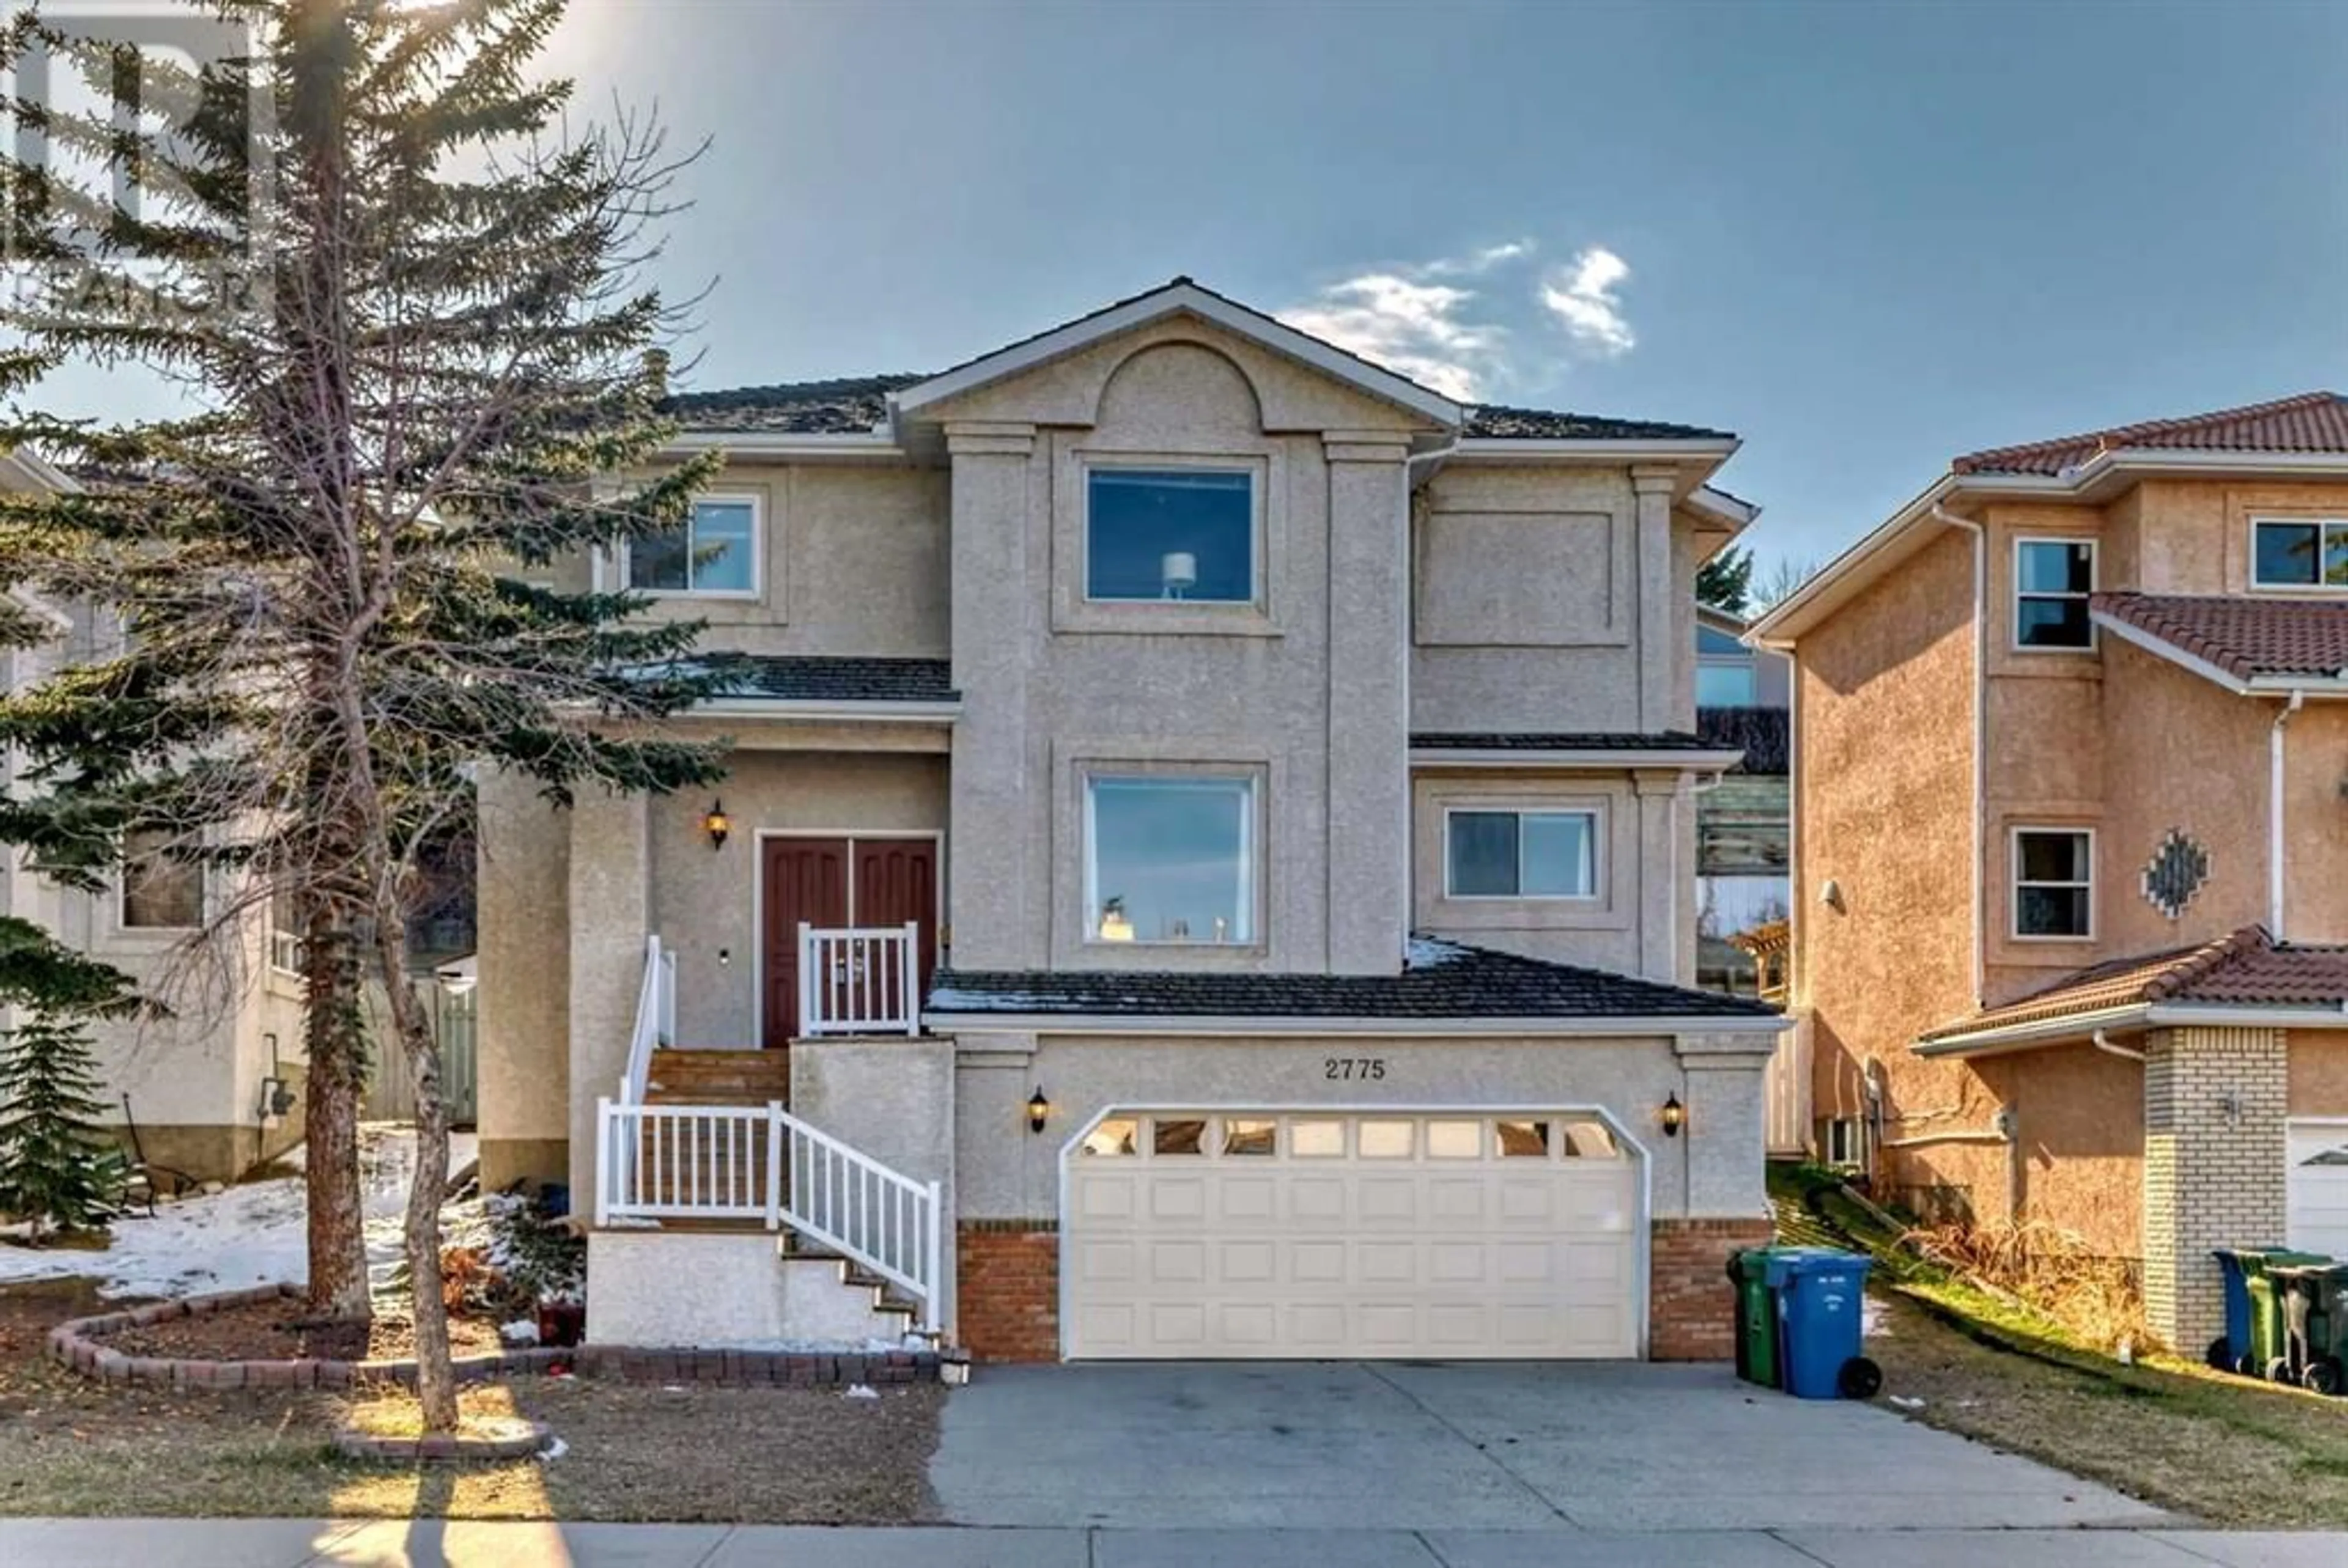 A pic from exterior of the house or condo for 2775 Signal Hill Drive SW, Calgary Alberta T3H2L7